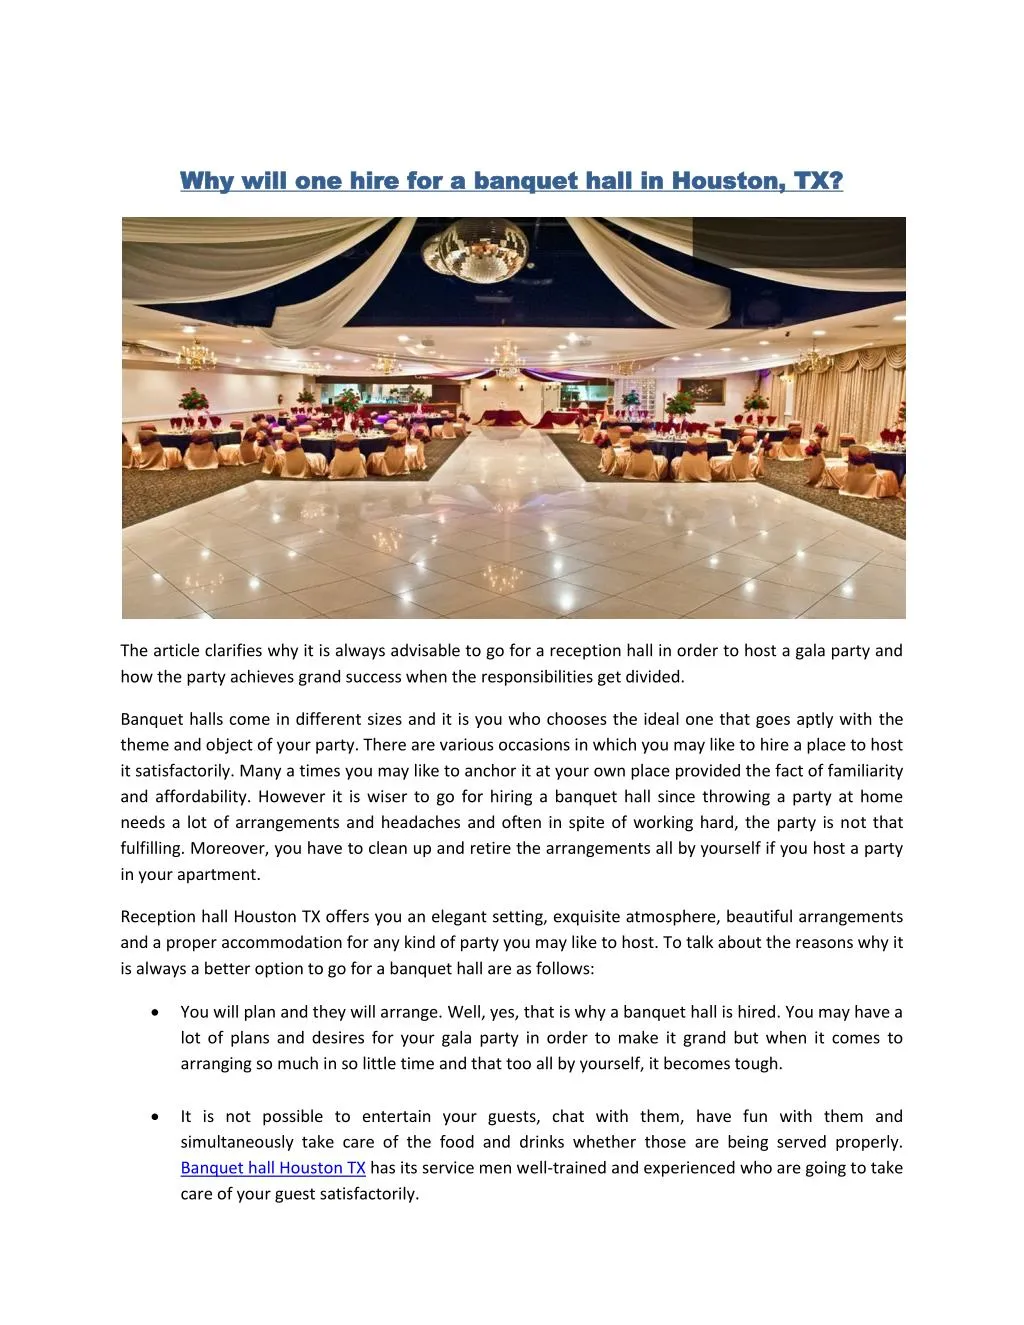 why will one hire for a banquet hall in houston